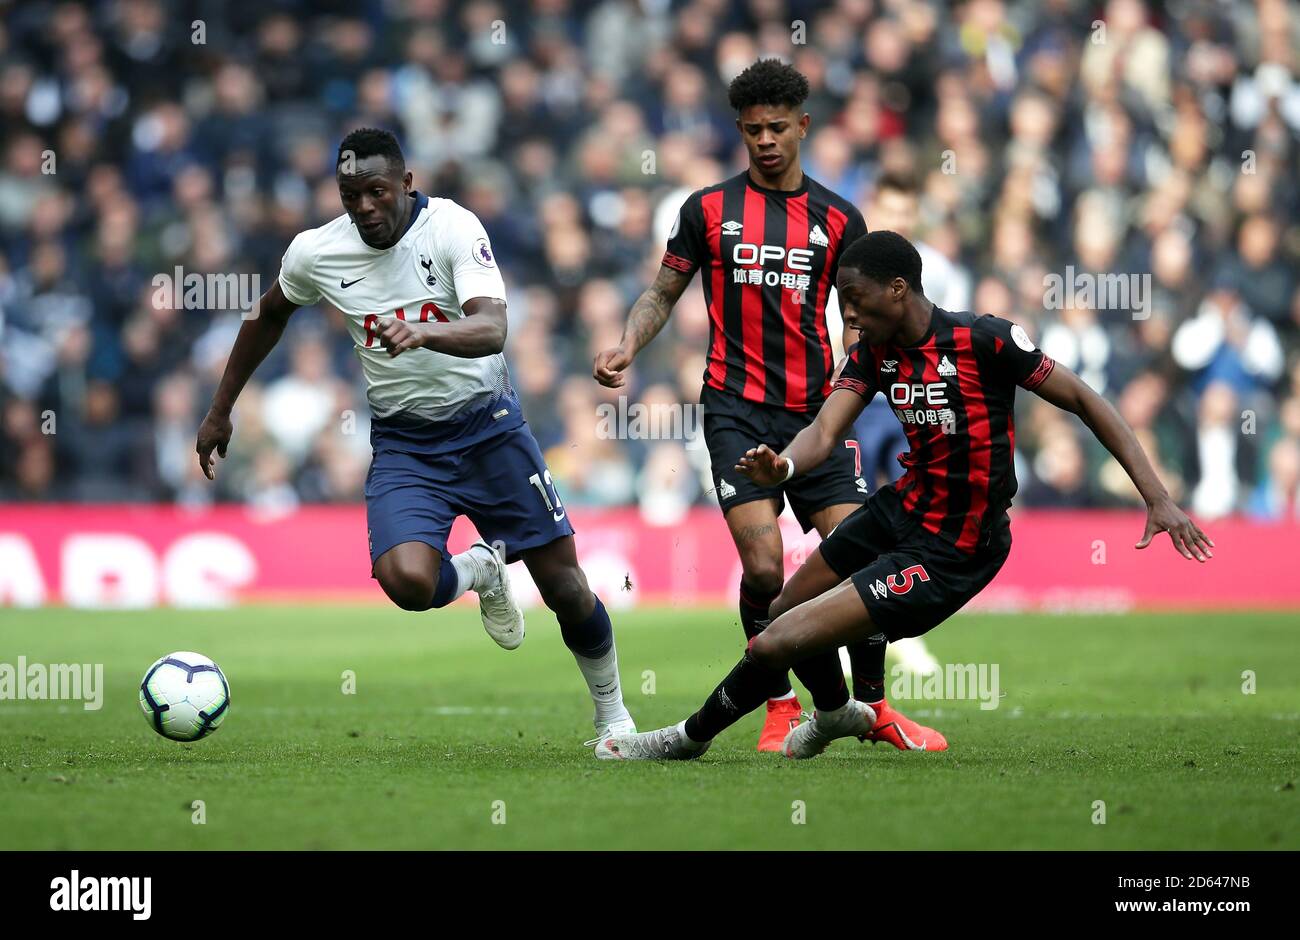 Tottenham Hotspur's Victor Wanyama (left) battles for the ball with Huddersfield Town's Juninho Bacuna and Terence Kongolo (right) Stock Photo